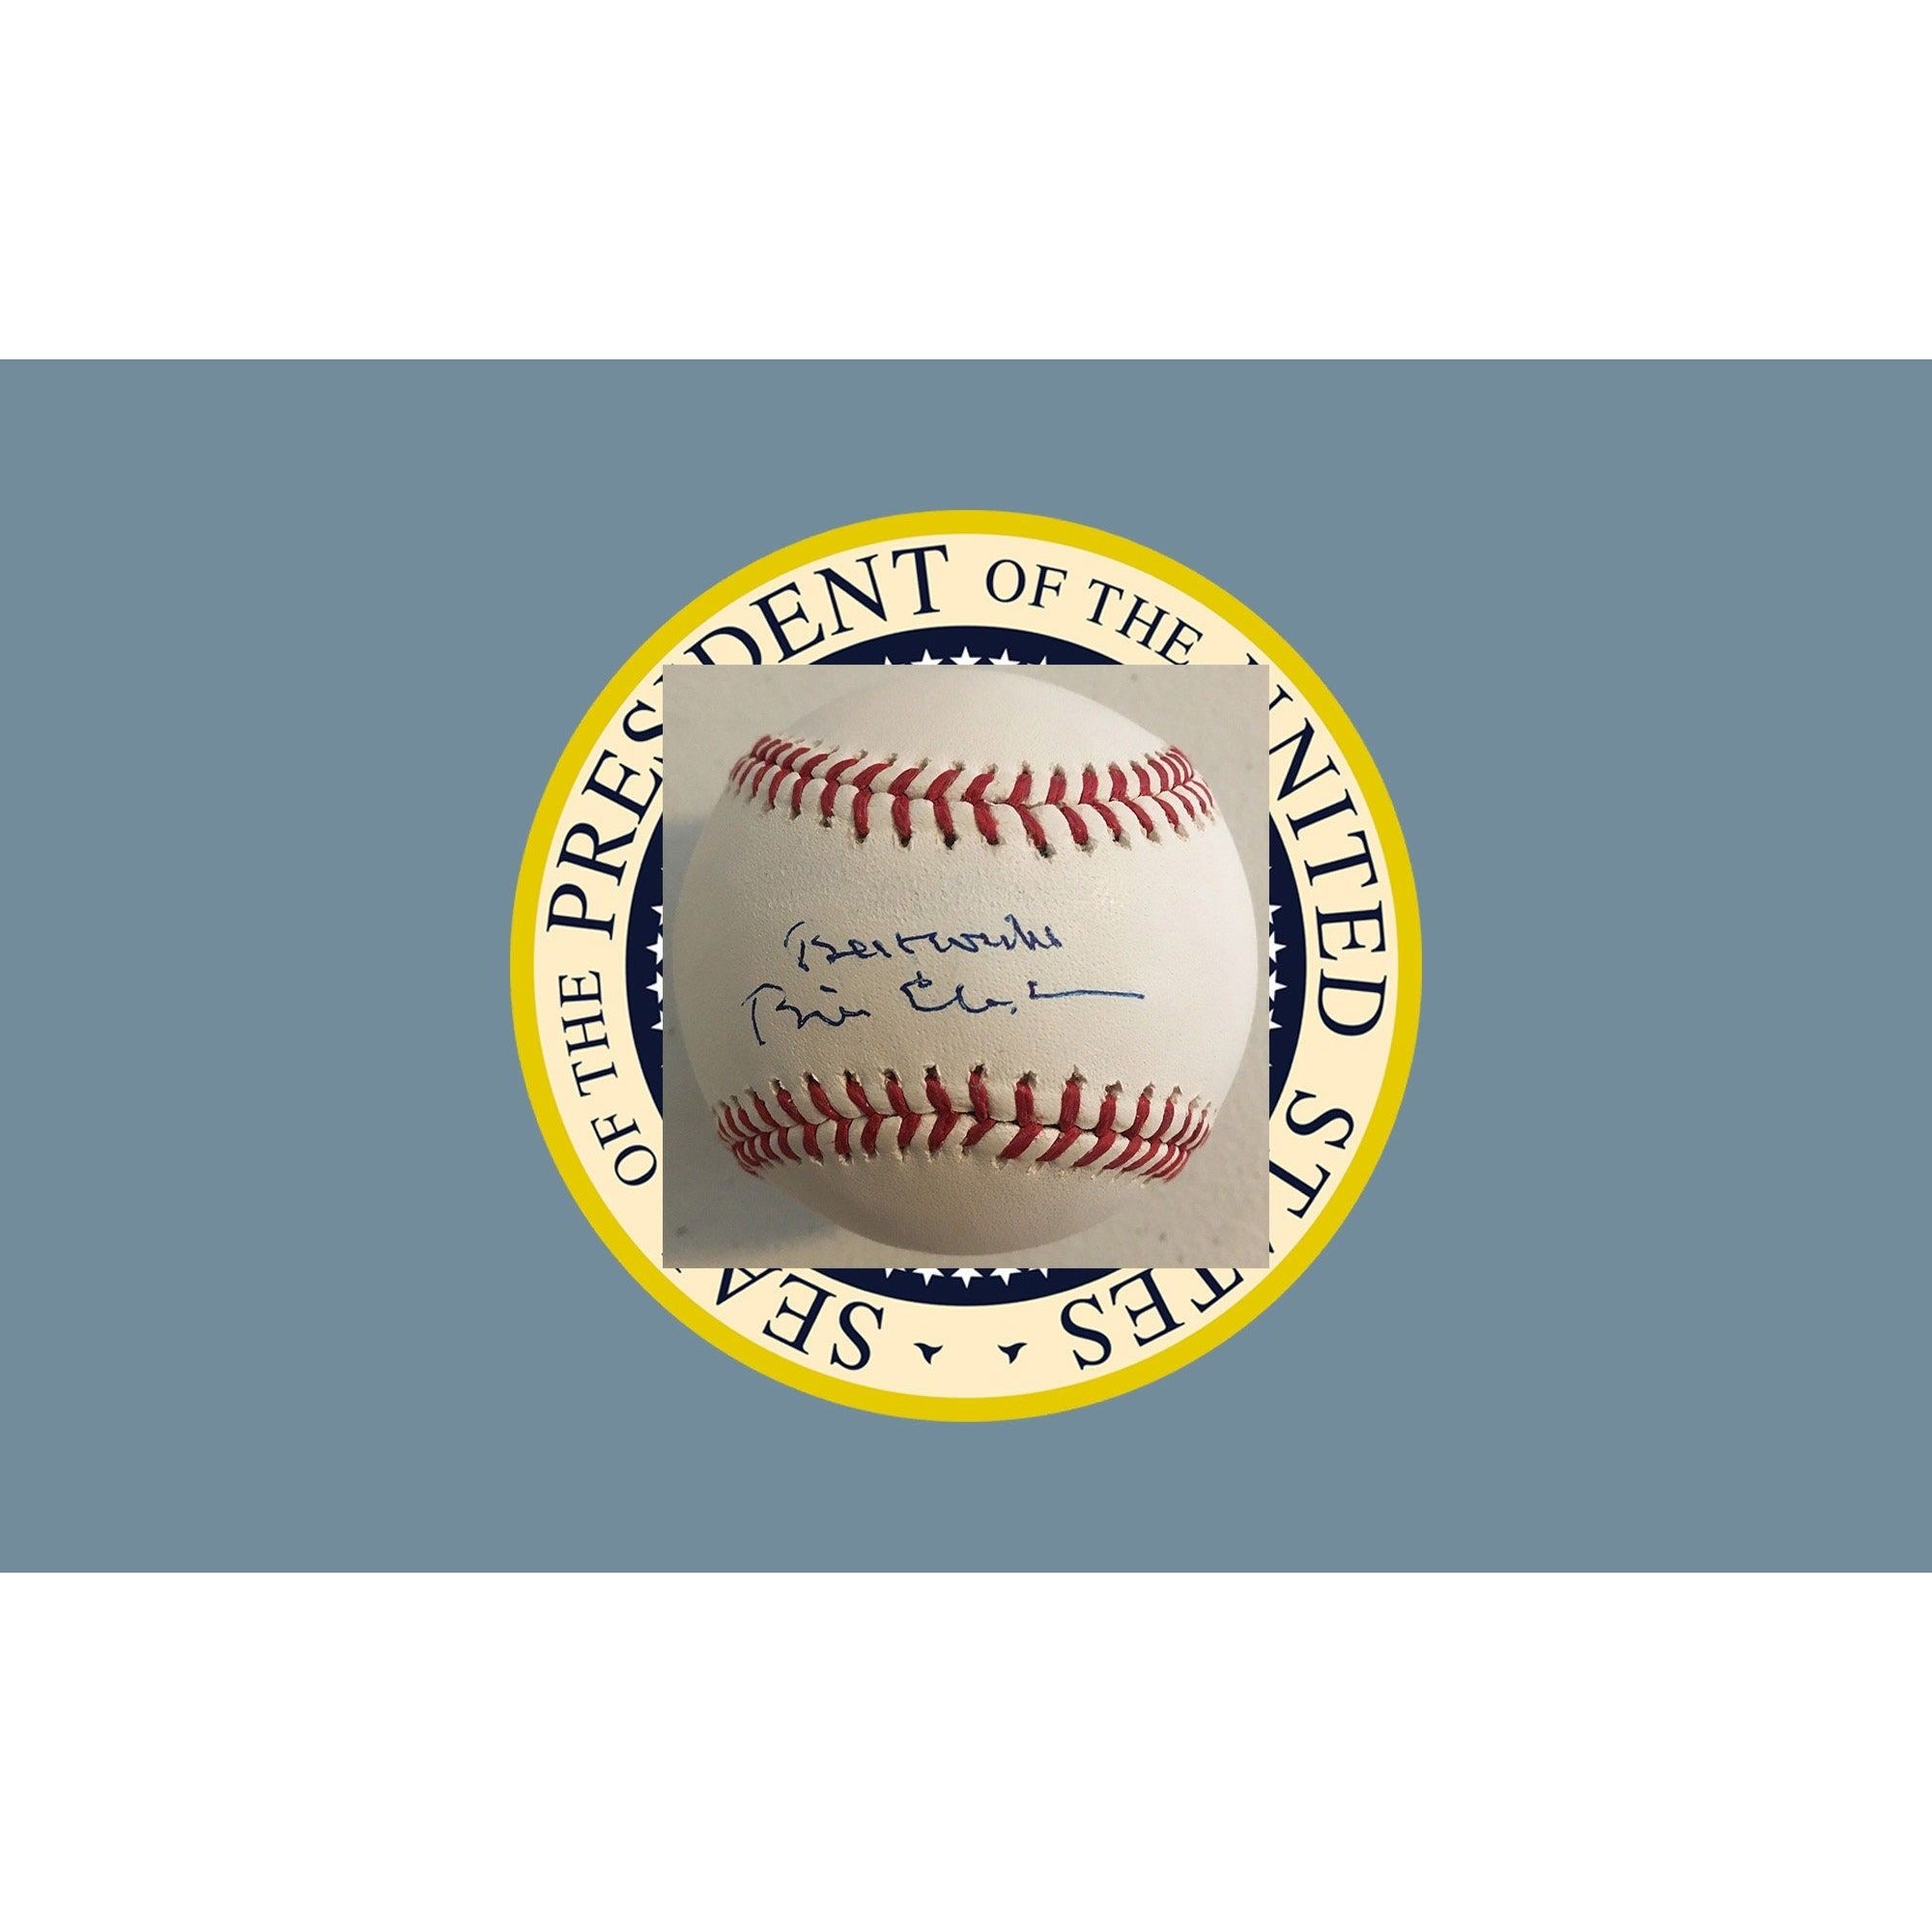 President Bill Clinton signed baseball with proof